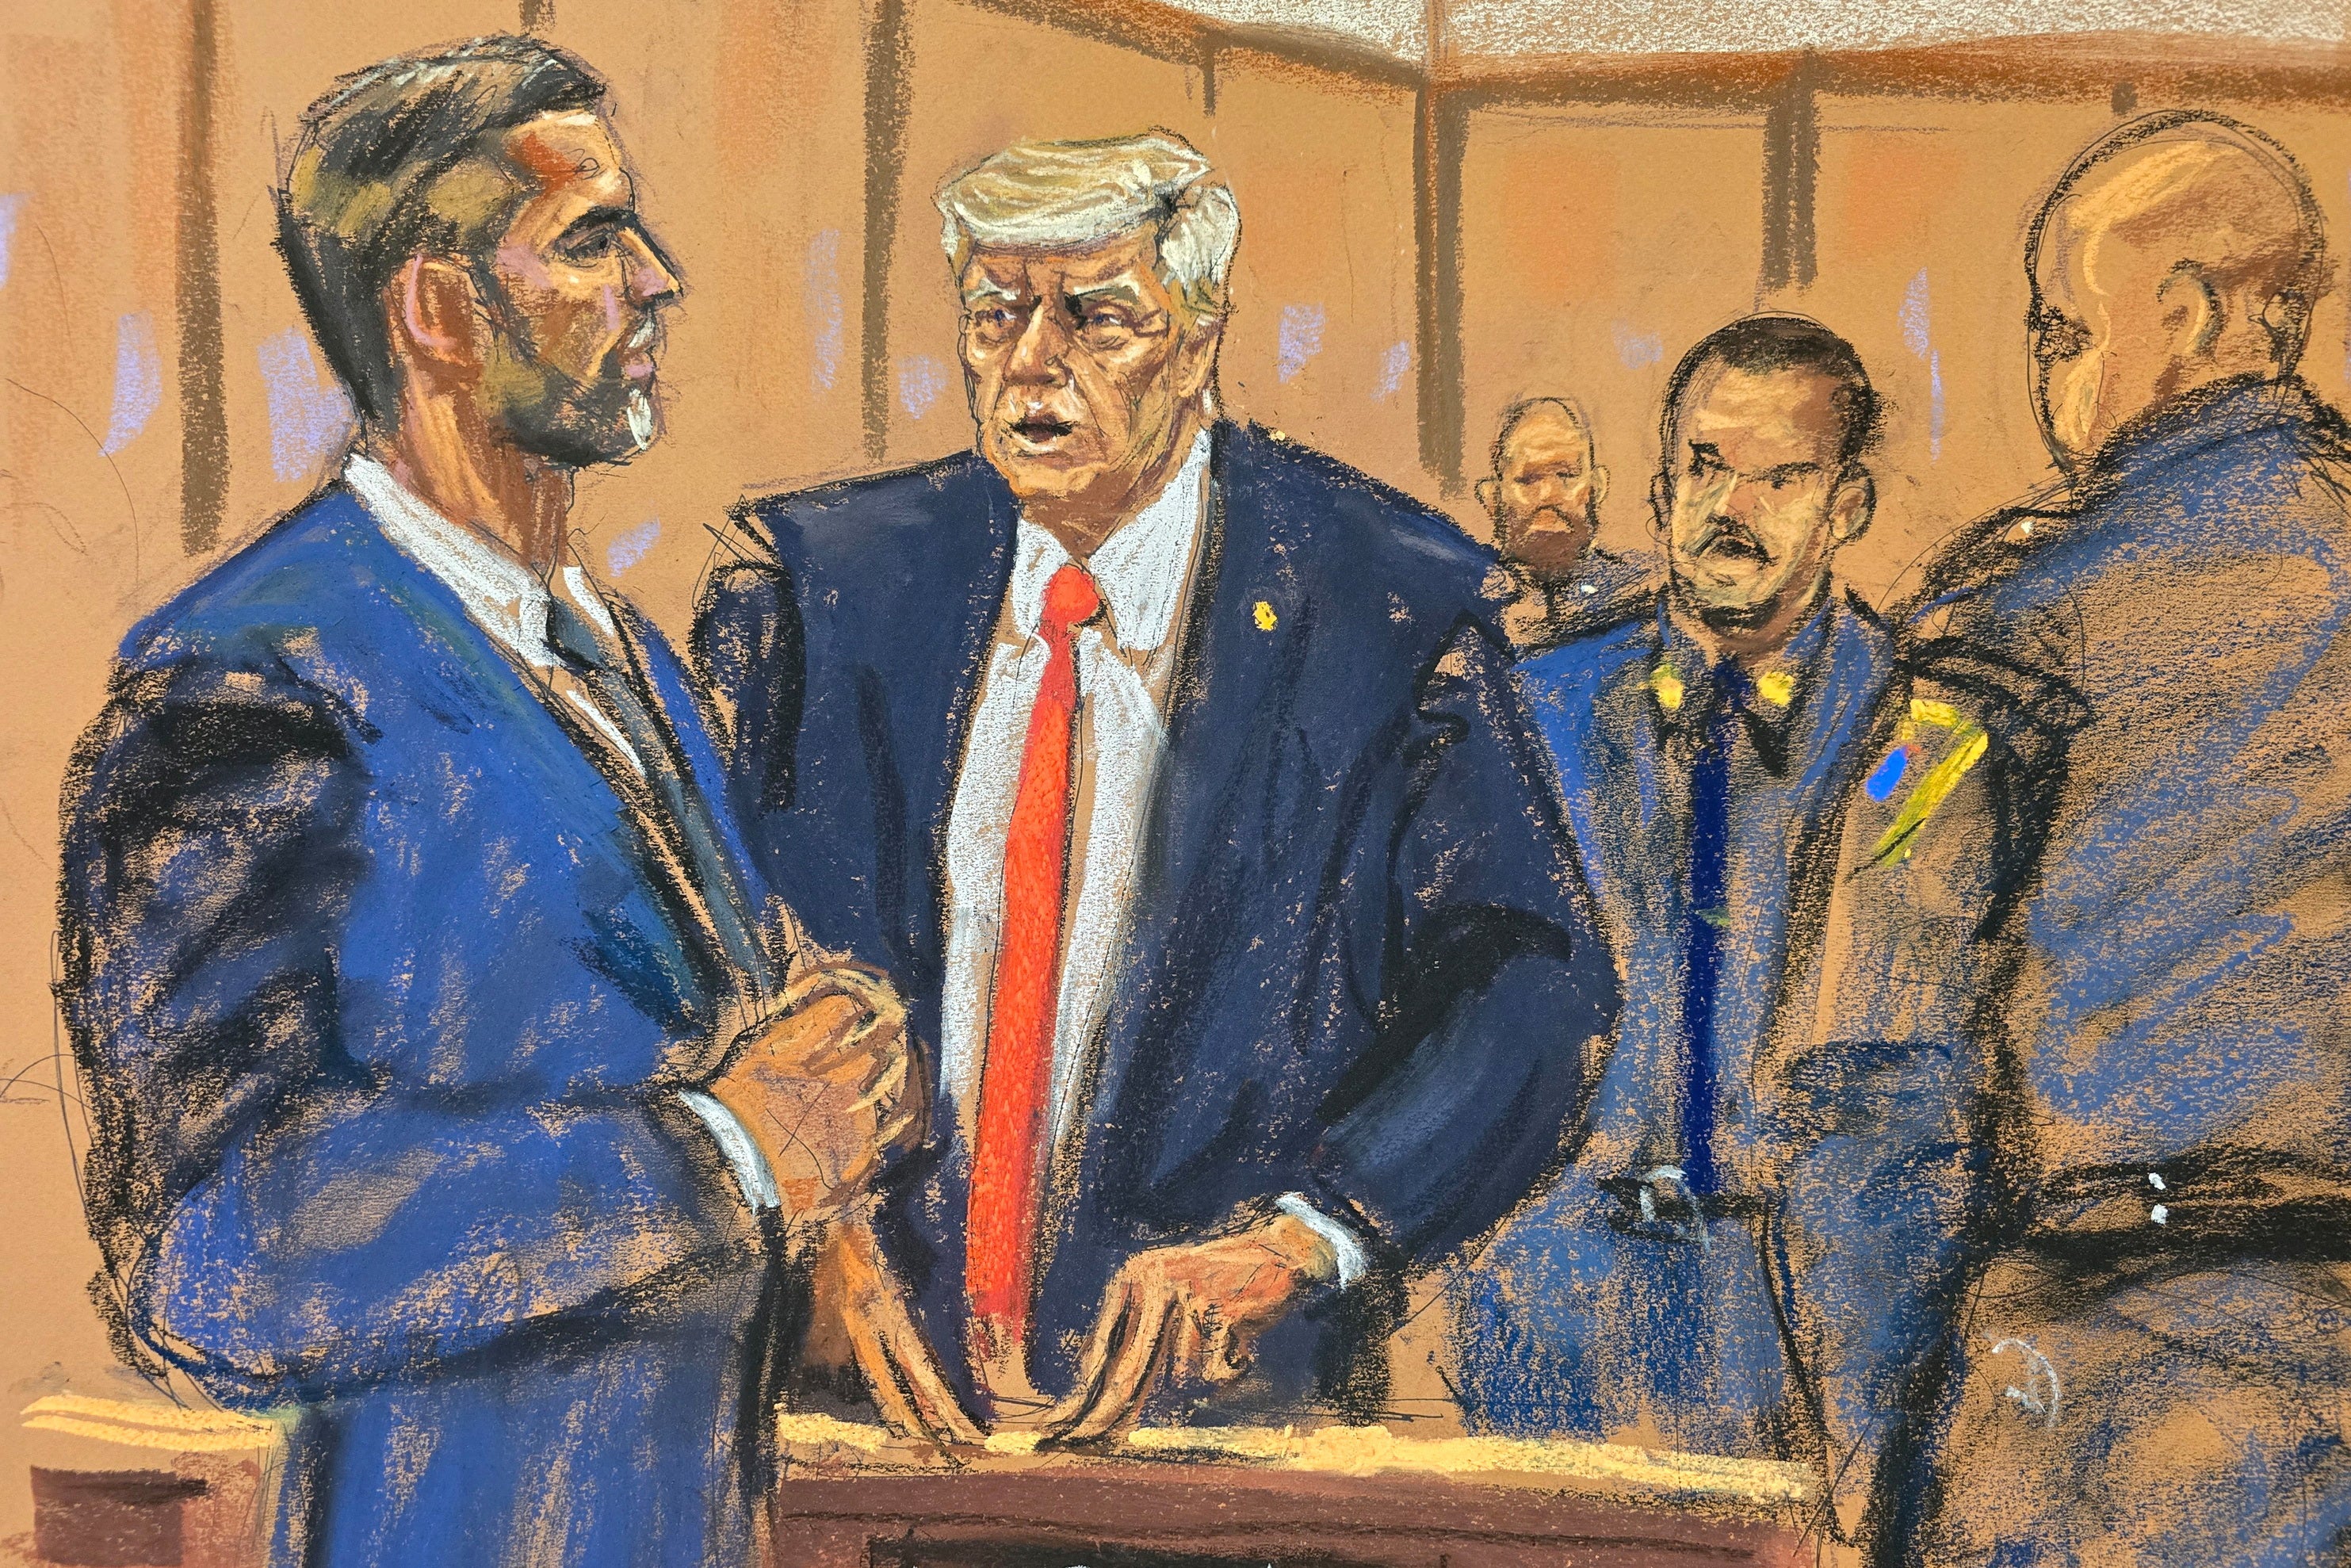 A courtroom sketch depicts Donald Trump chatting with his son Eric Trump in a Manhattan criminal courtroom on 30 April.